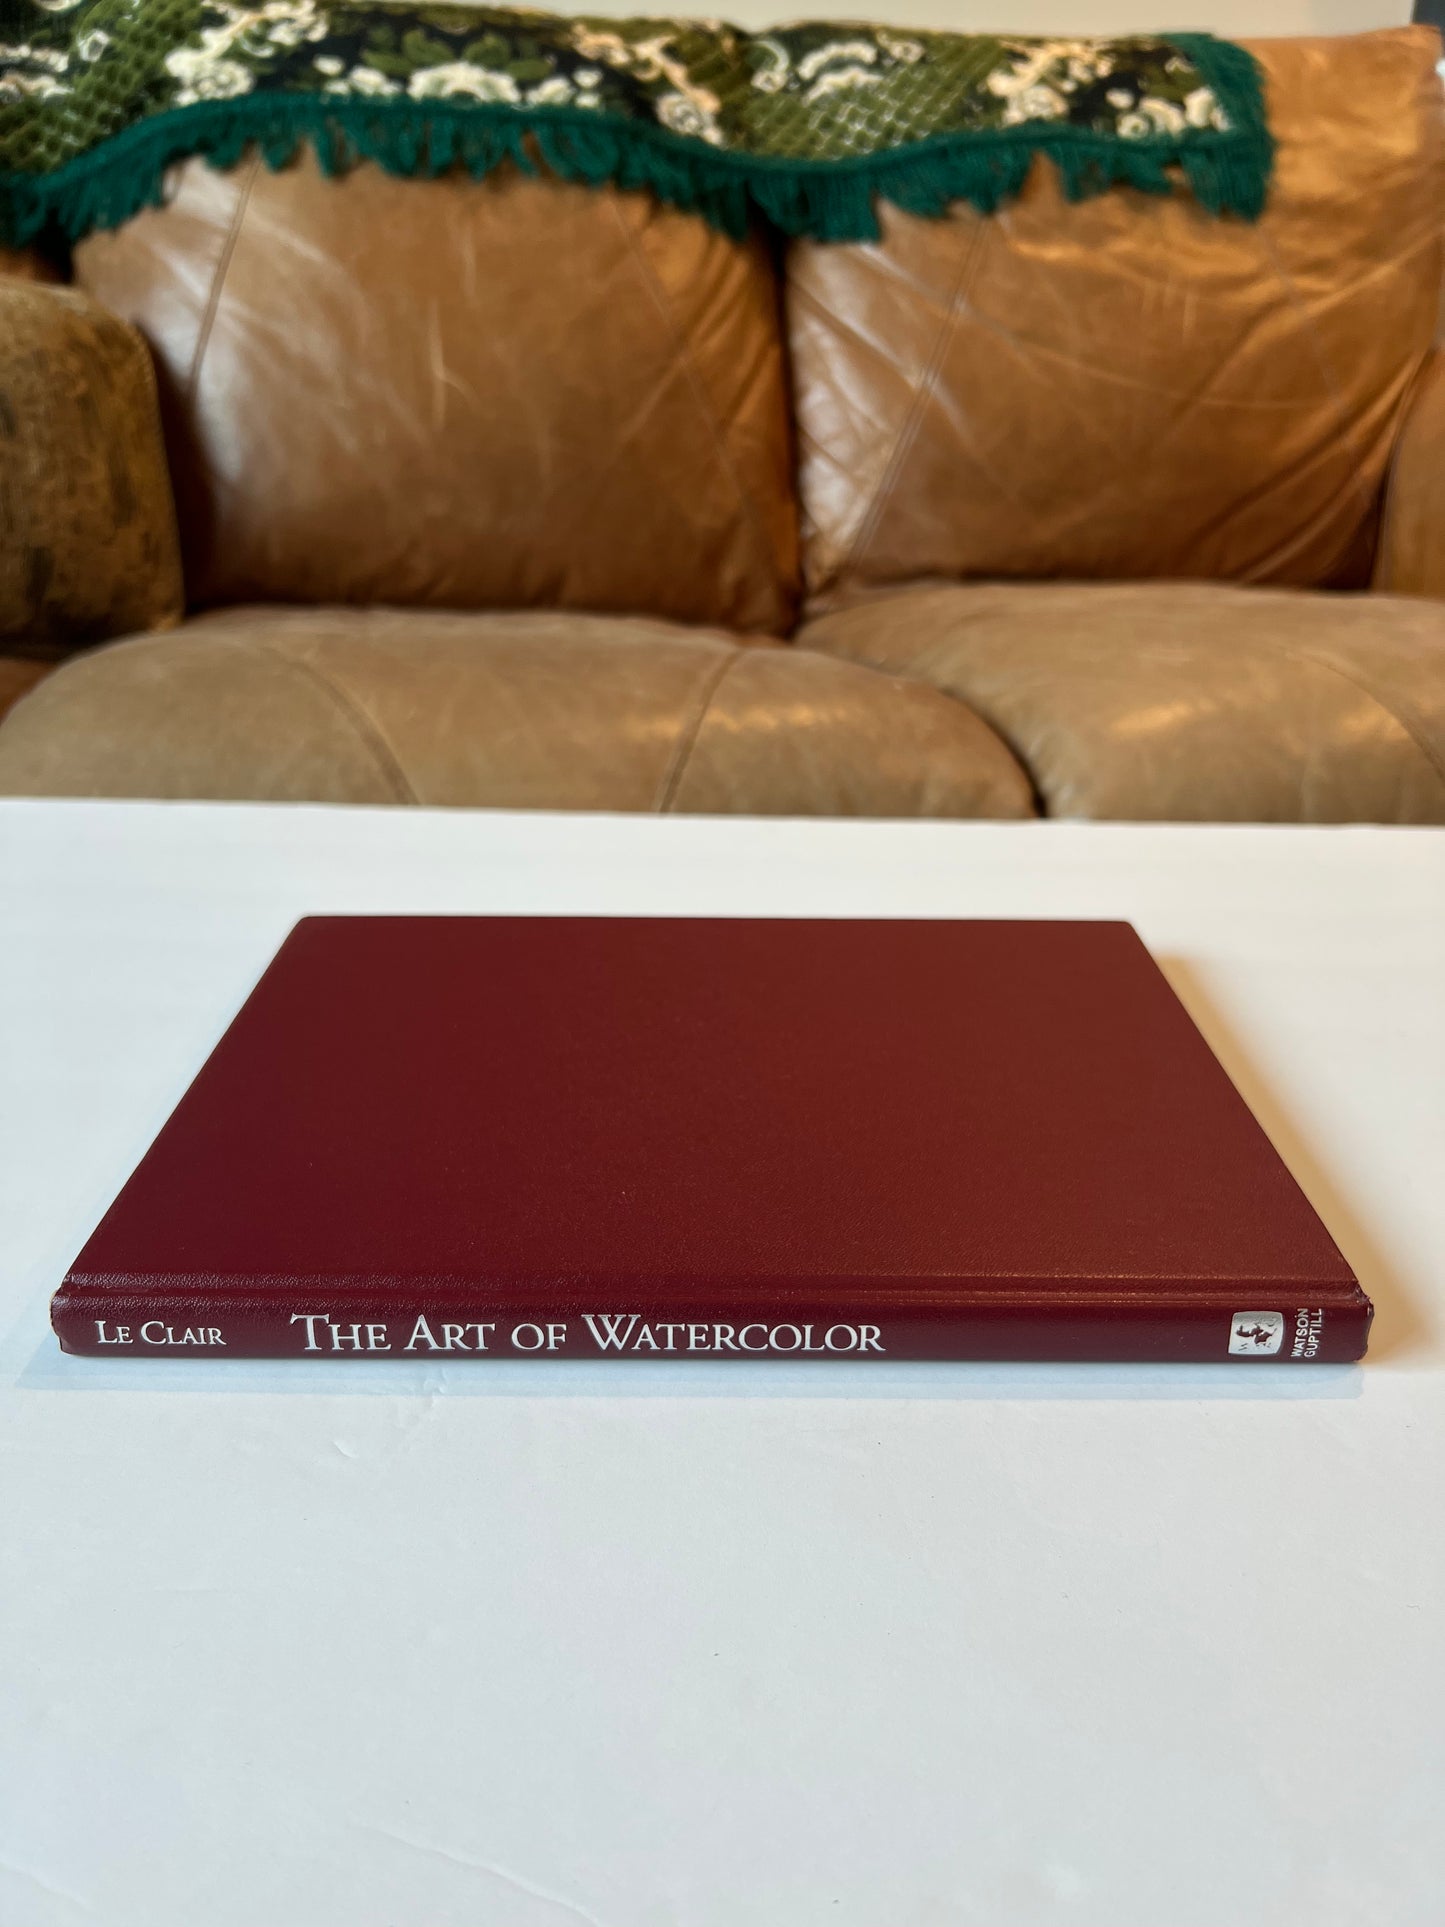 The Art of Watercolor book